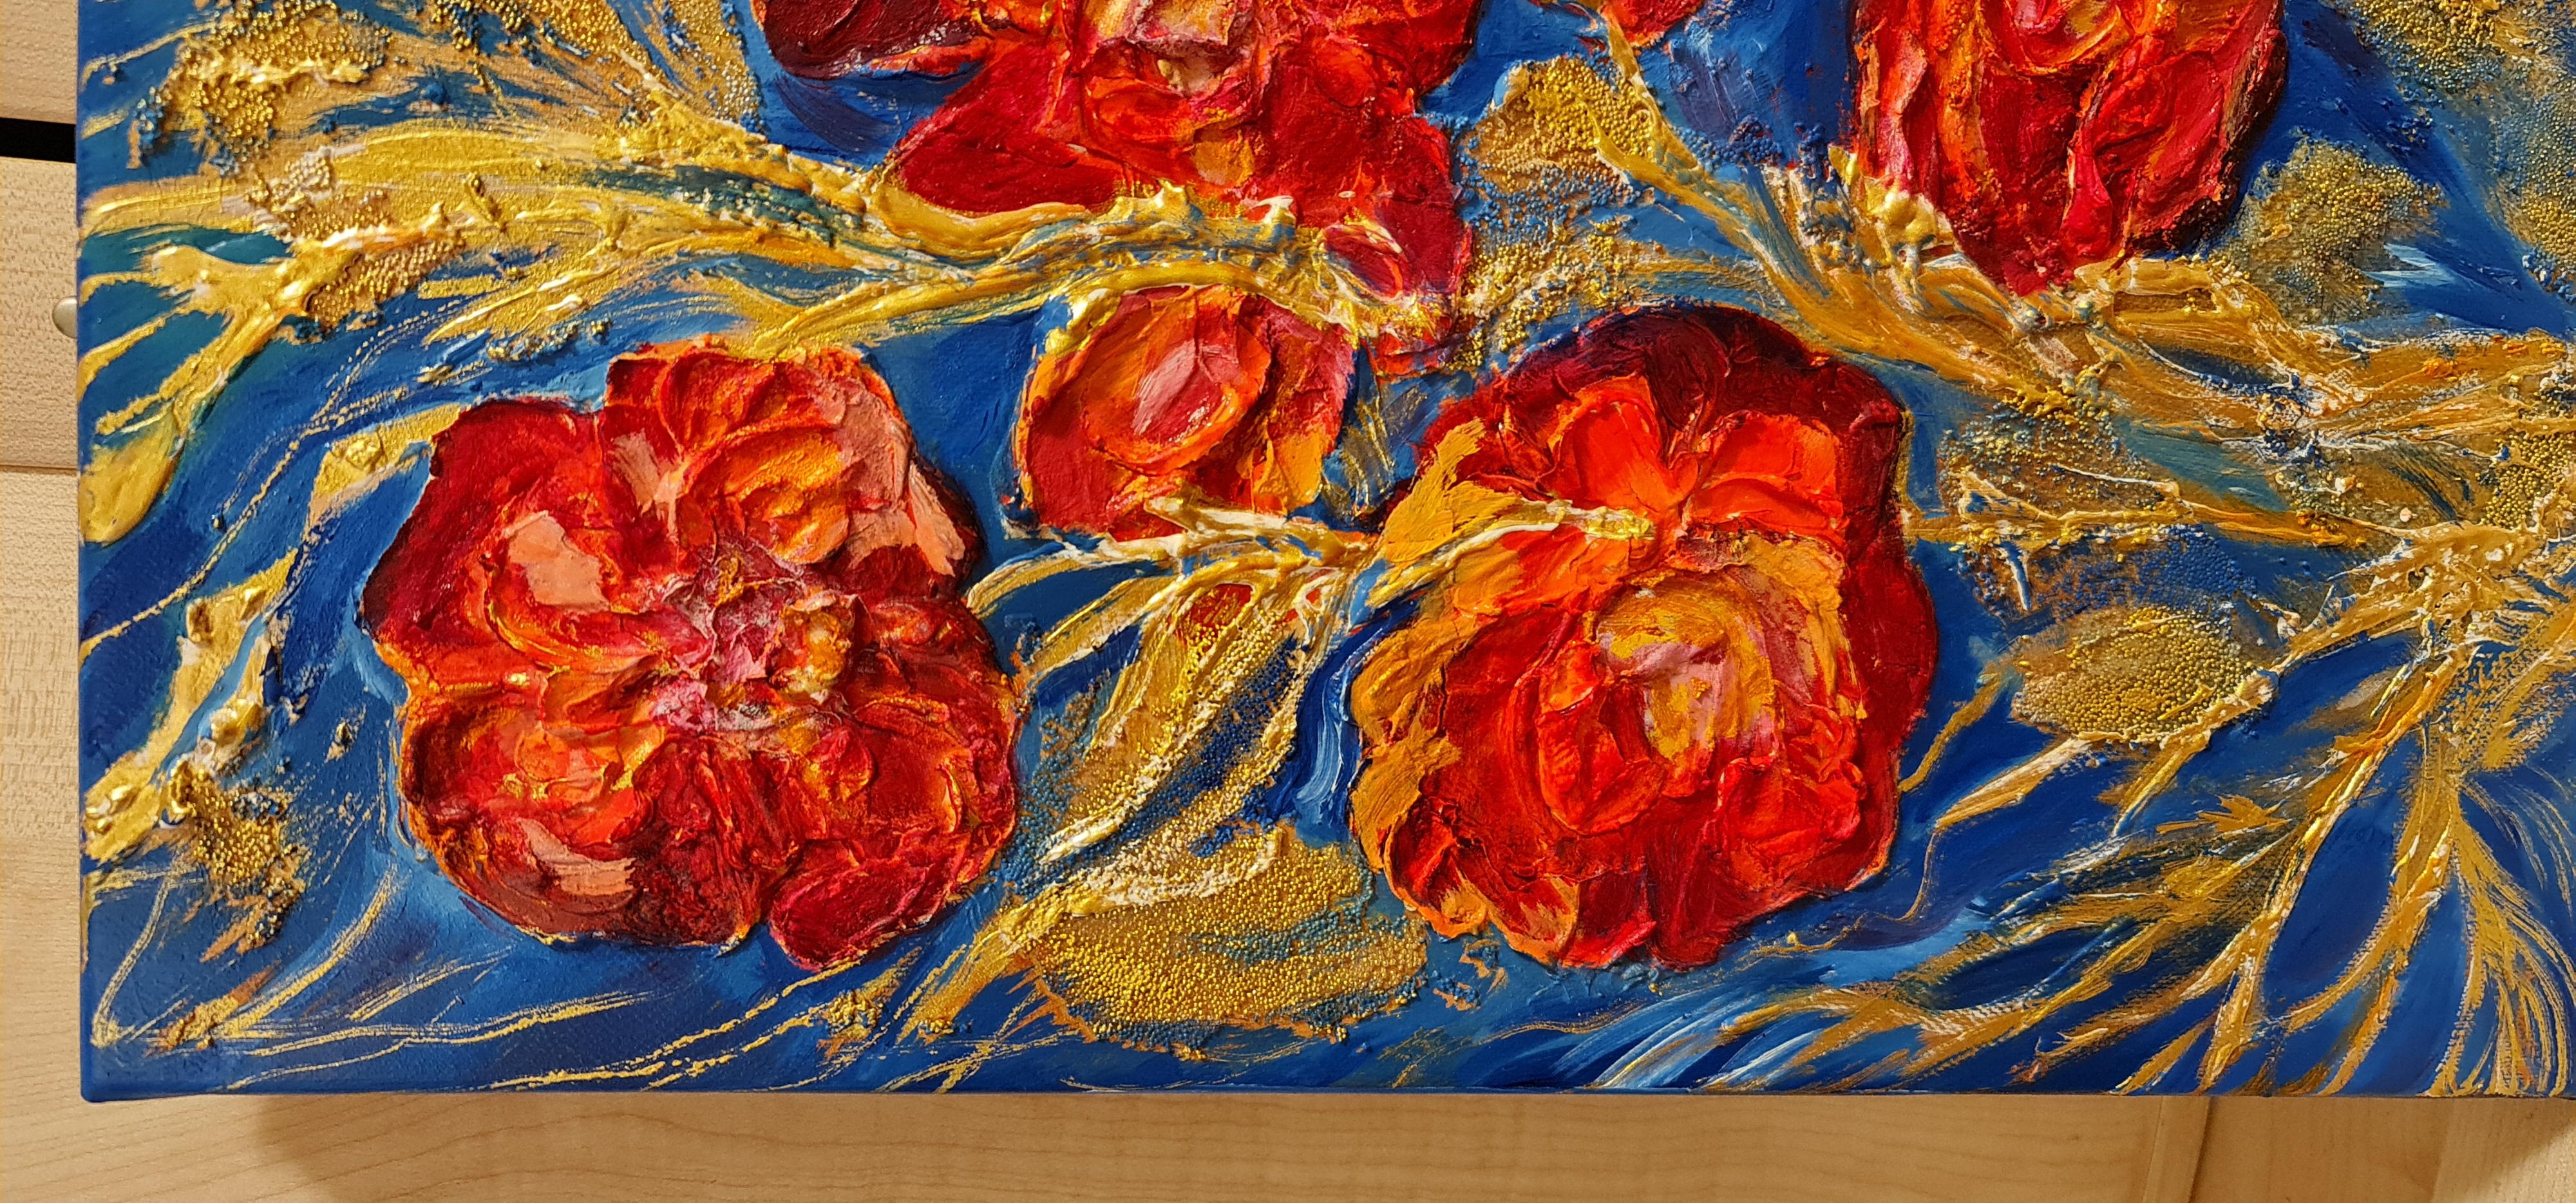 Embossed textured orange flowers on a blue backgraund.Still life abstraction - Painting by Lilya Volskaya